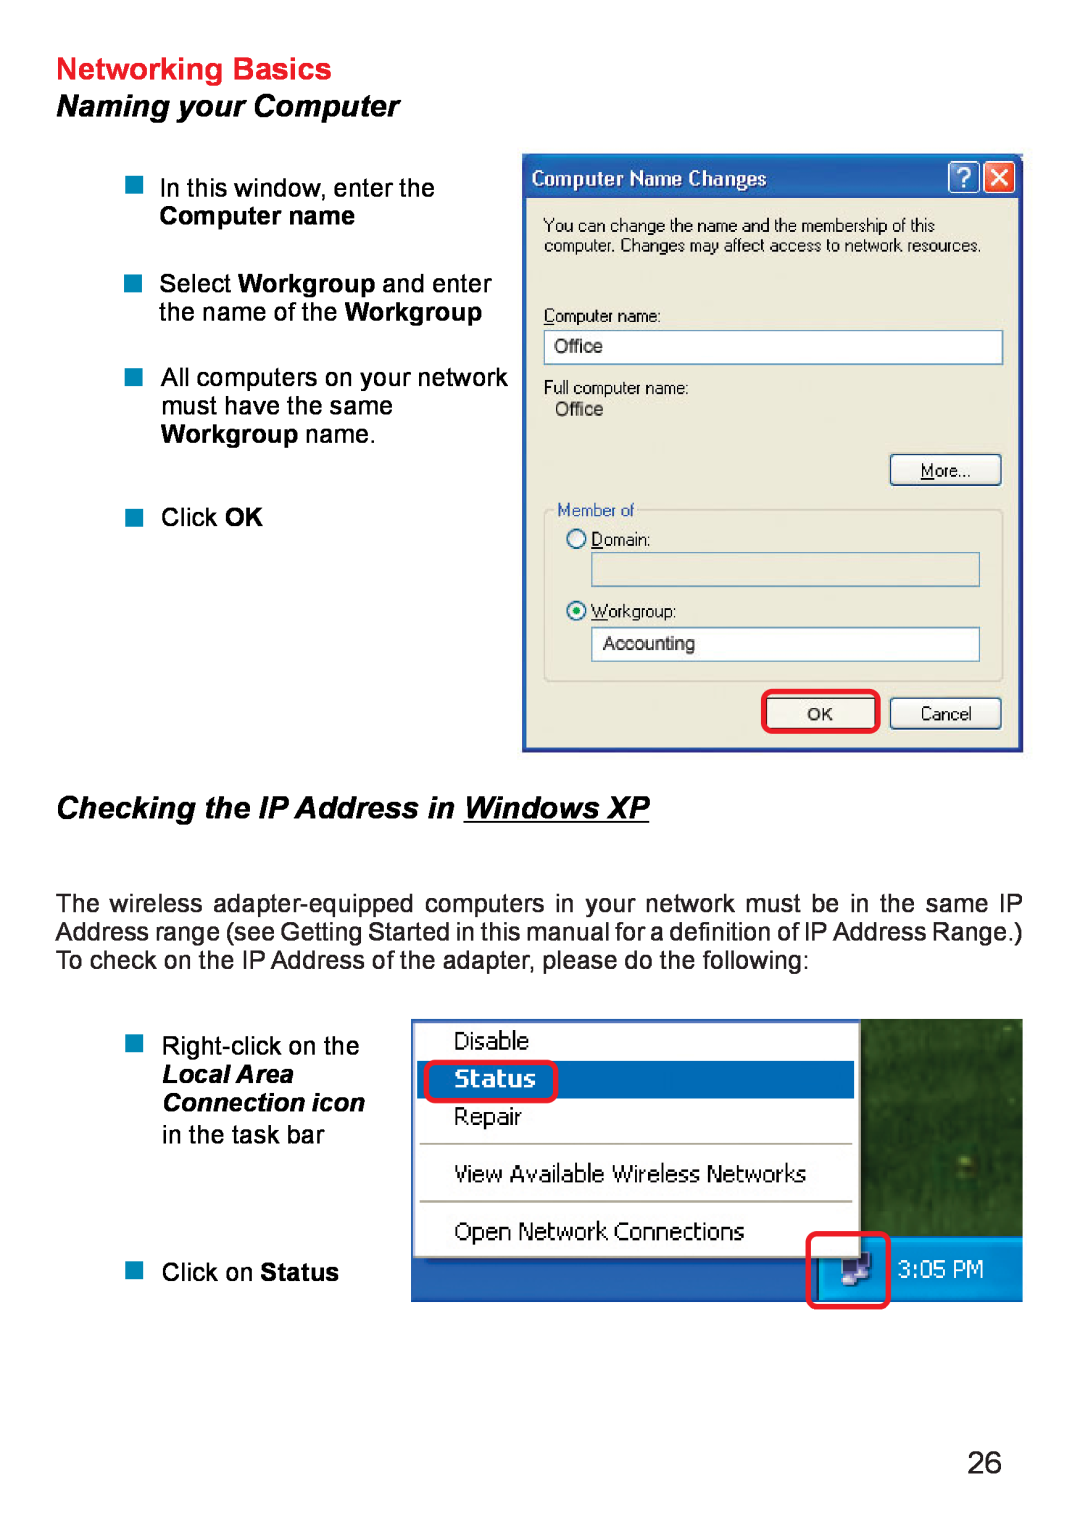 D-Link DWL-120+ manual Checking the IP Address in Windows XP, Networking Basics, Naming your Computer, Computer name 